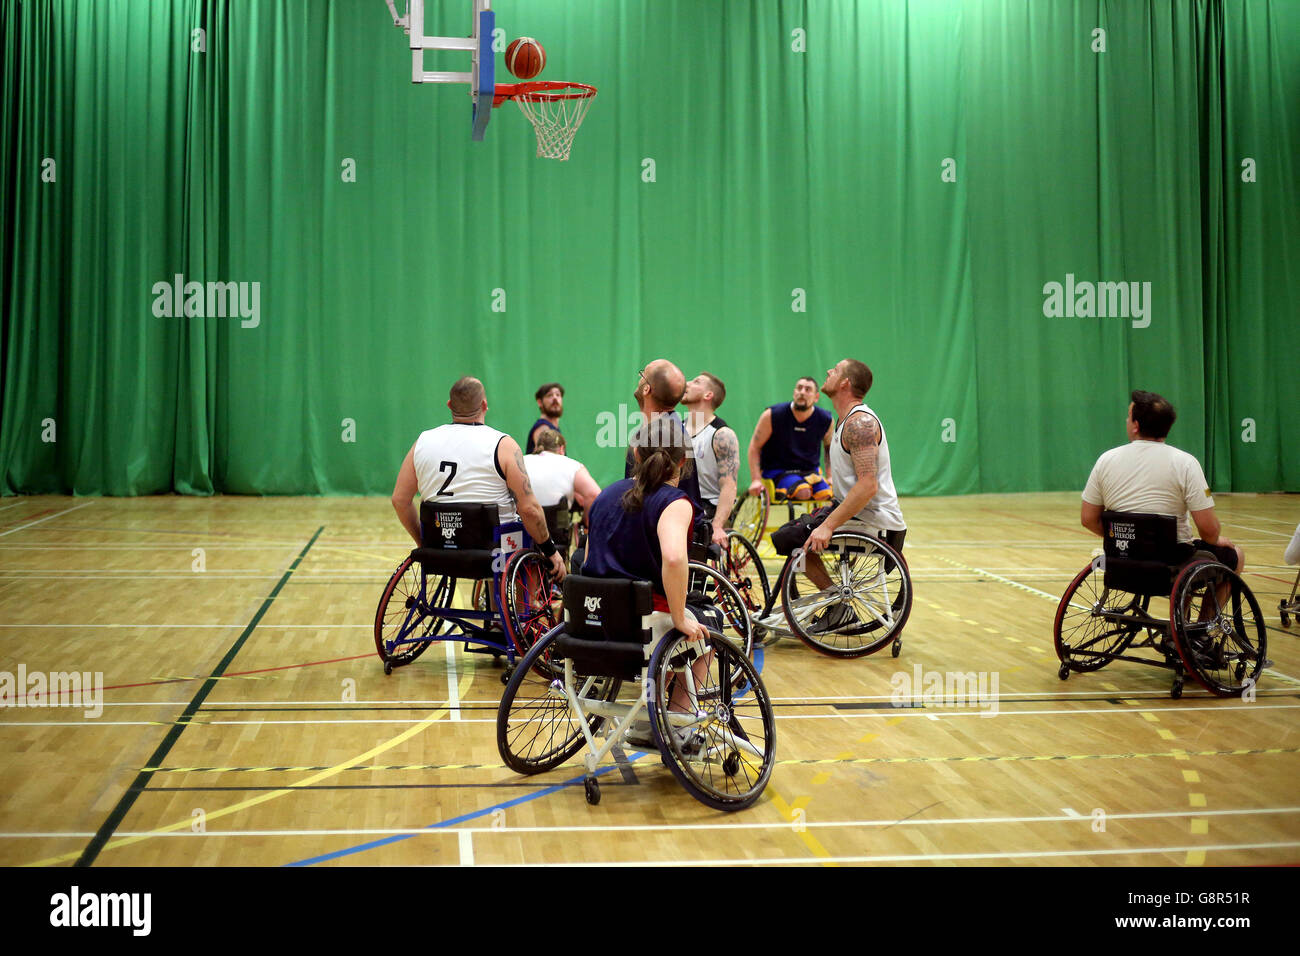 A training session for the wheelchair basketball team ahead of the Invictus Games in Orlando Stock Photo